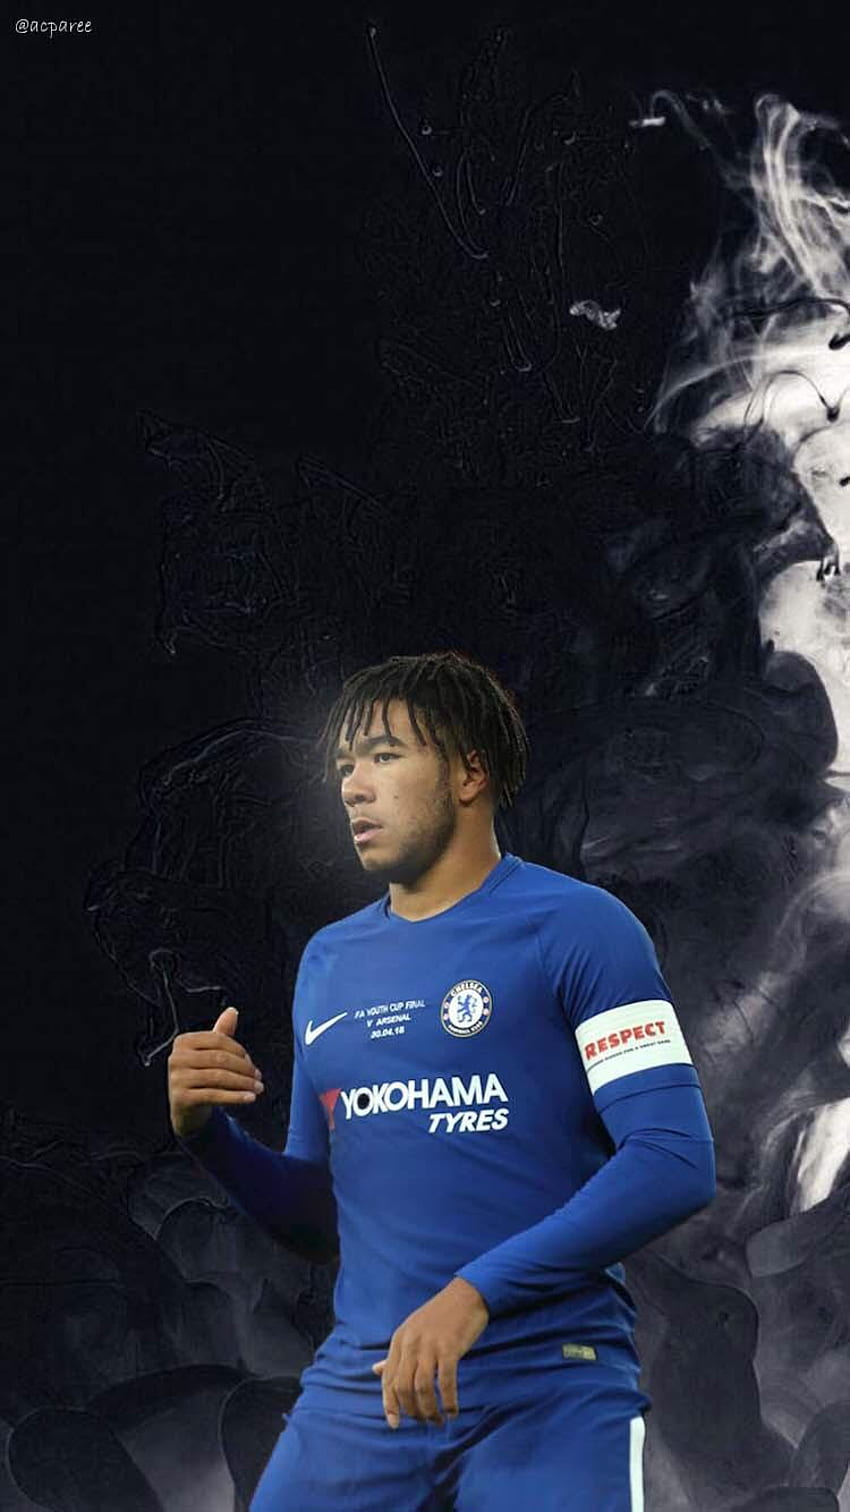 This was my first time using hop but just decided to make a Reece James . Feedback appreciated! : chelseafc HD phone wallpaper